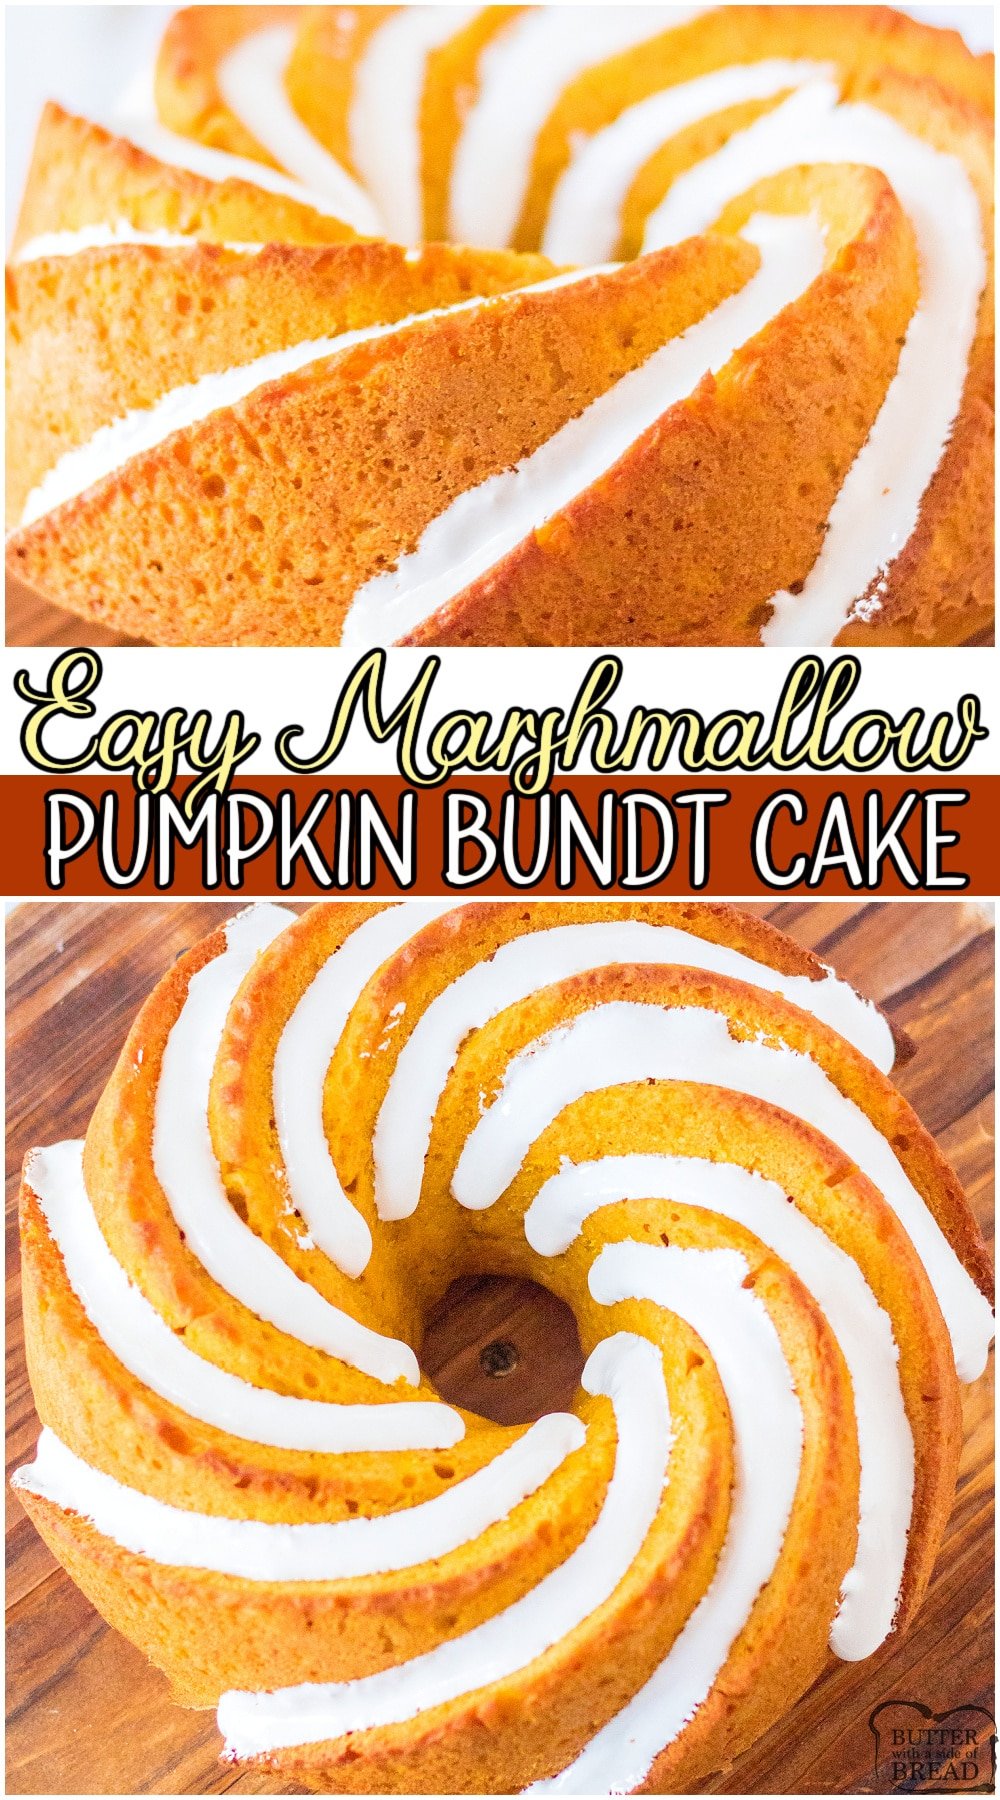 Pumpkin Marshmallow Bundt Cake is an easy pumpkin cake that starts with a cake mix! Marshmallow fluff, pumpkin and delightful Fall spices combine in this delicious pumpkin bundt cake recipe!